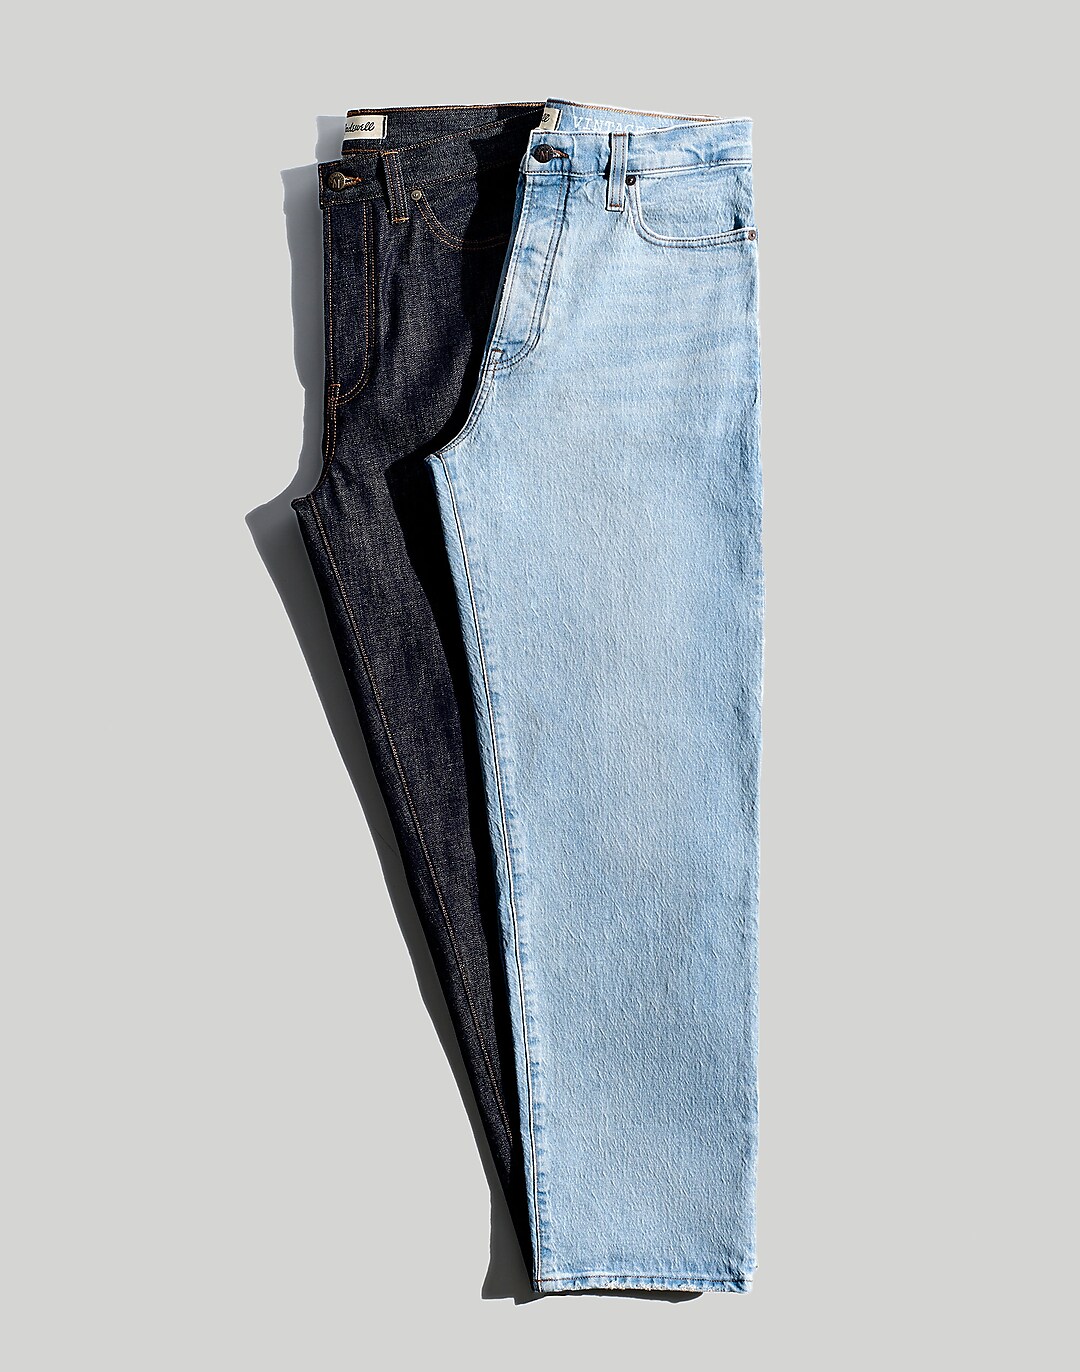 in Indigo Jeans Raw Relaxed Vintage Straight Wash